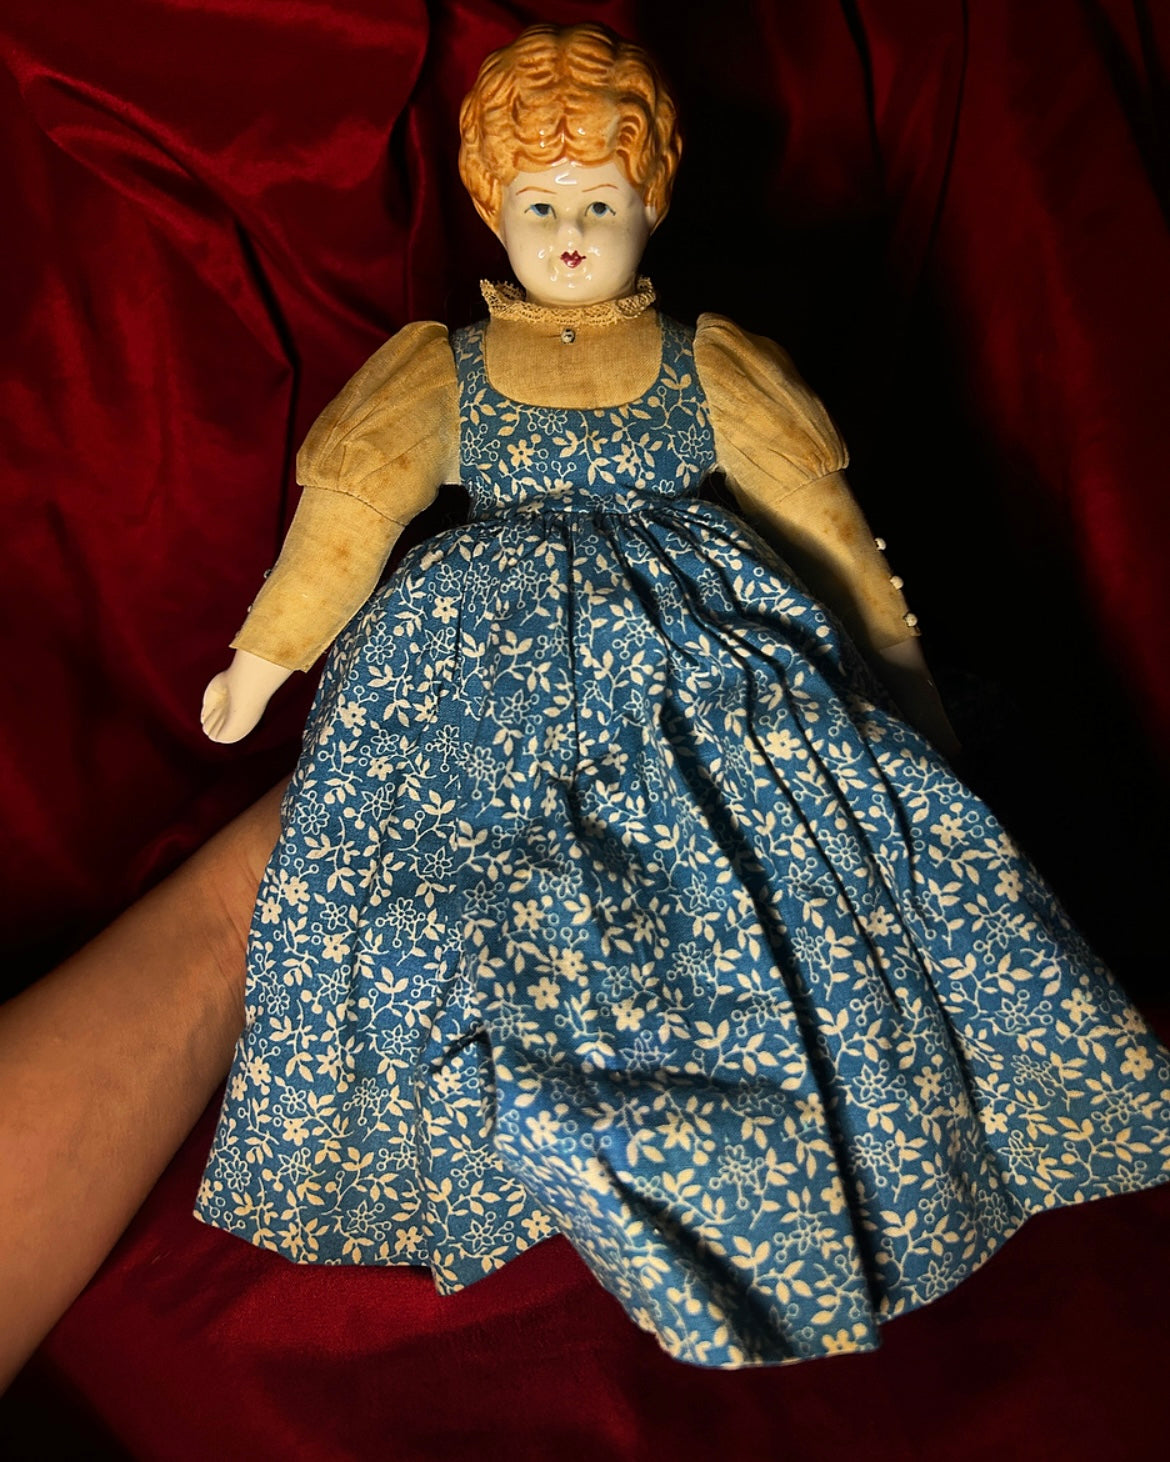 Vintage China Doll in a Blue Dress